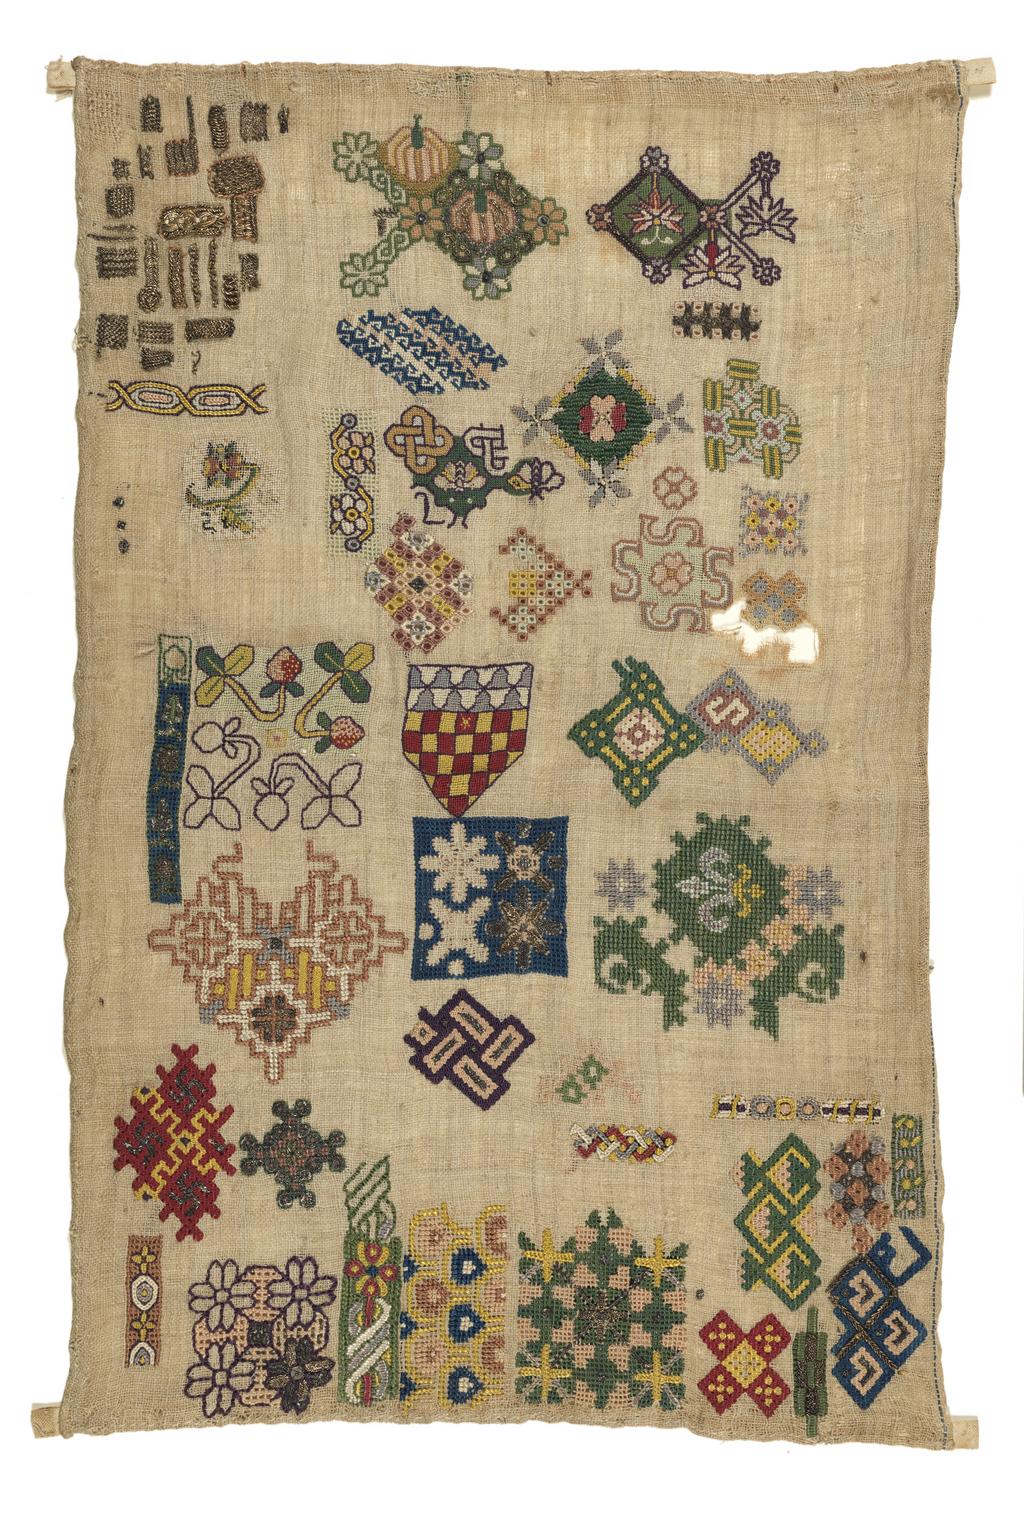 An image of Embroidery/Spot motif sampler. Unidentified Maker. Probably worked by Mary (b. 1608), daughter of Amyas Chichester; or Mary (b. 1615) or Margaret (b. 1619), daughters of Henry Chichester of Arlington Devon. Embroidered on linen with polychrome silks in tent, cross, long-armed cross, back, chain, eyelet, rococo and faggot stitch with pulled work. Silver and silver-guilt thread is worked in braid and interlacing stitches, and there is laid and couched work with one spangle. Three of the edges are hemmed and there is a selvedge with a single blue line on the right side. Length 42.25 cm, width 27 cm, circa 1620-circa 1640. England, Devonshire.